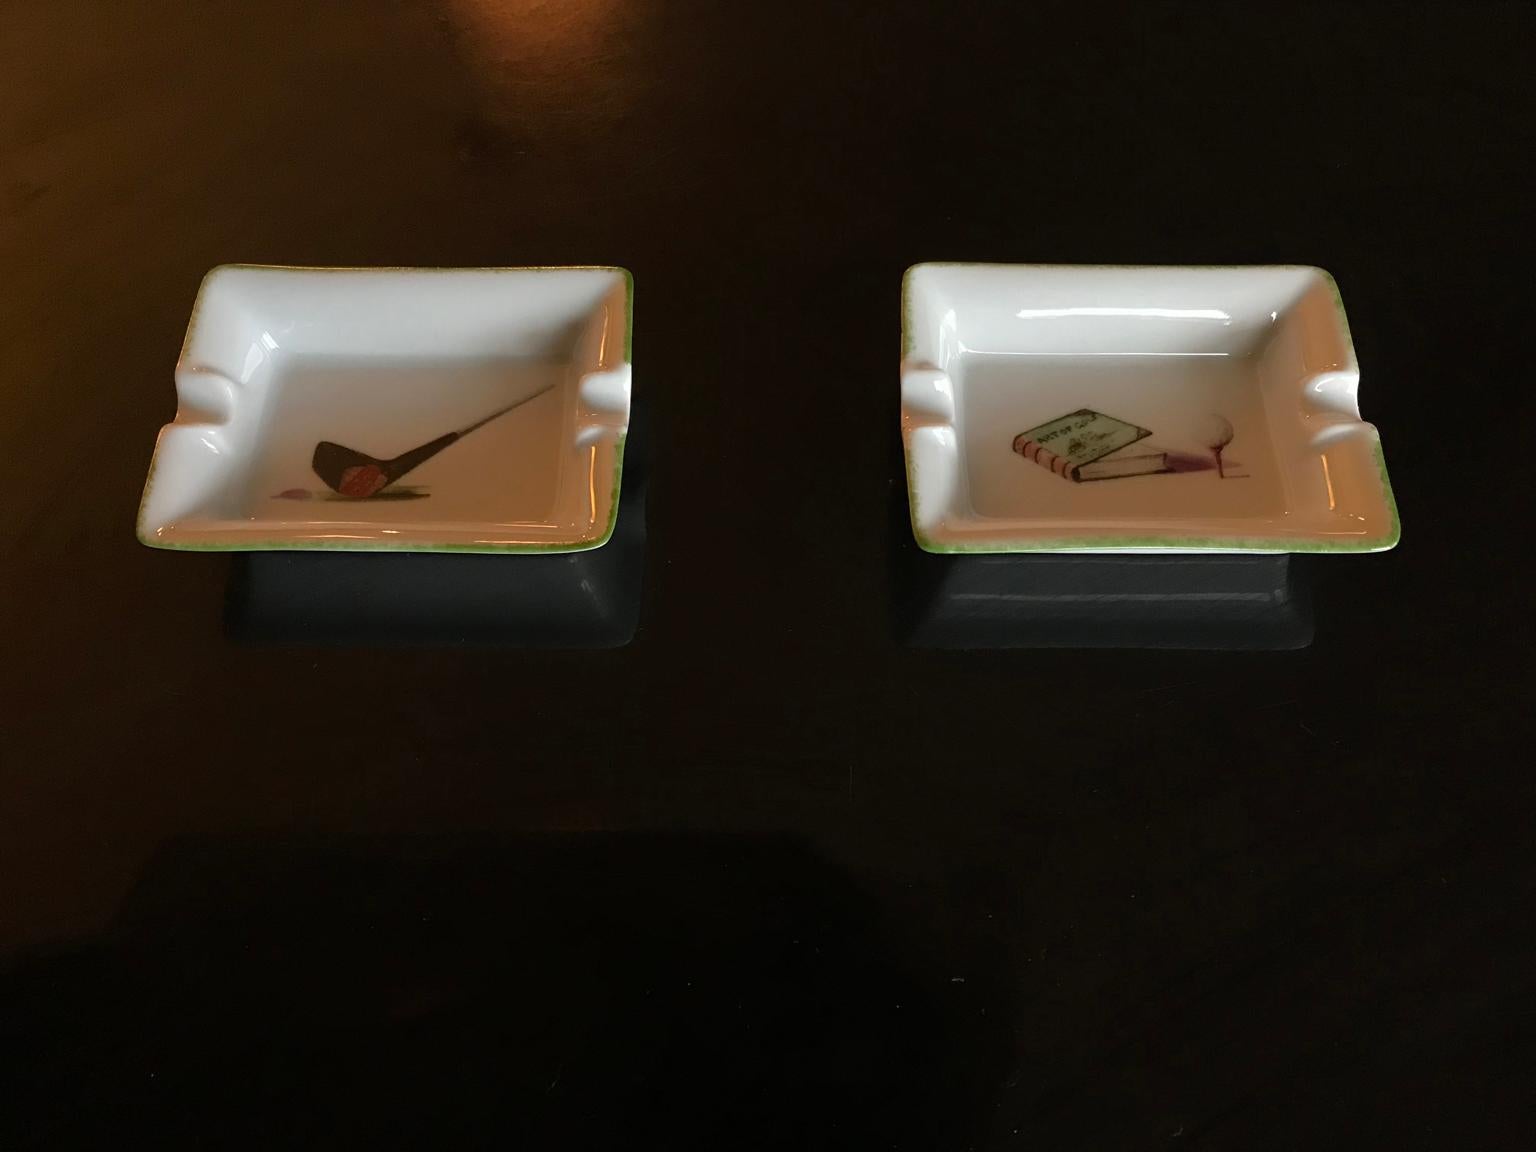 Pair of Limoges porcelain ashtrays in hand painted golf decoration, presented in lovely orange boxes.

